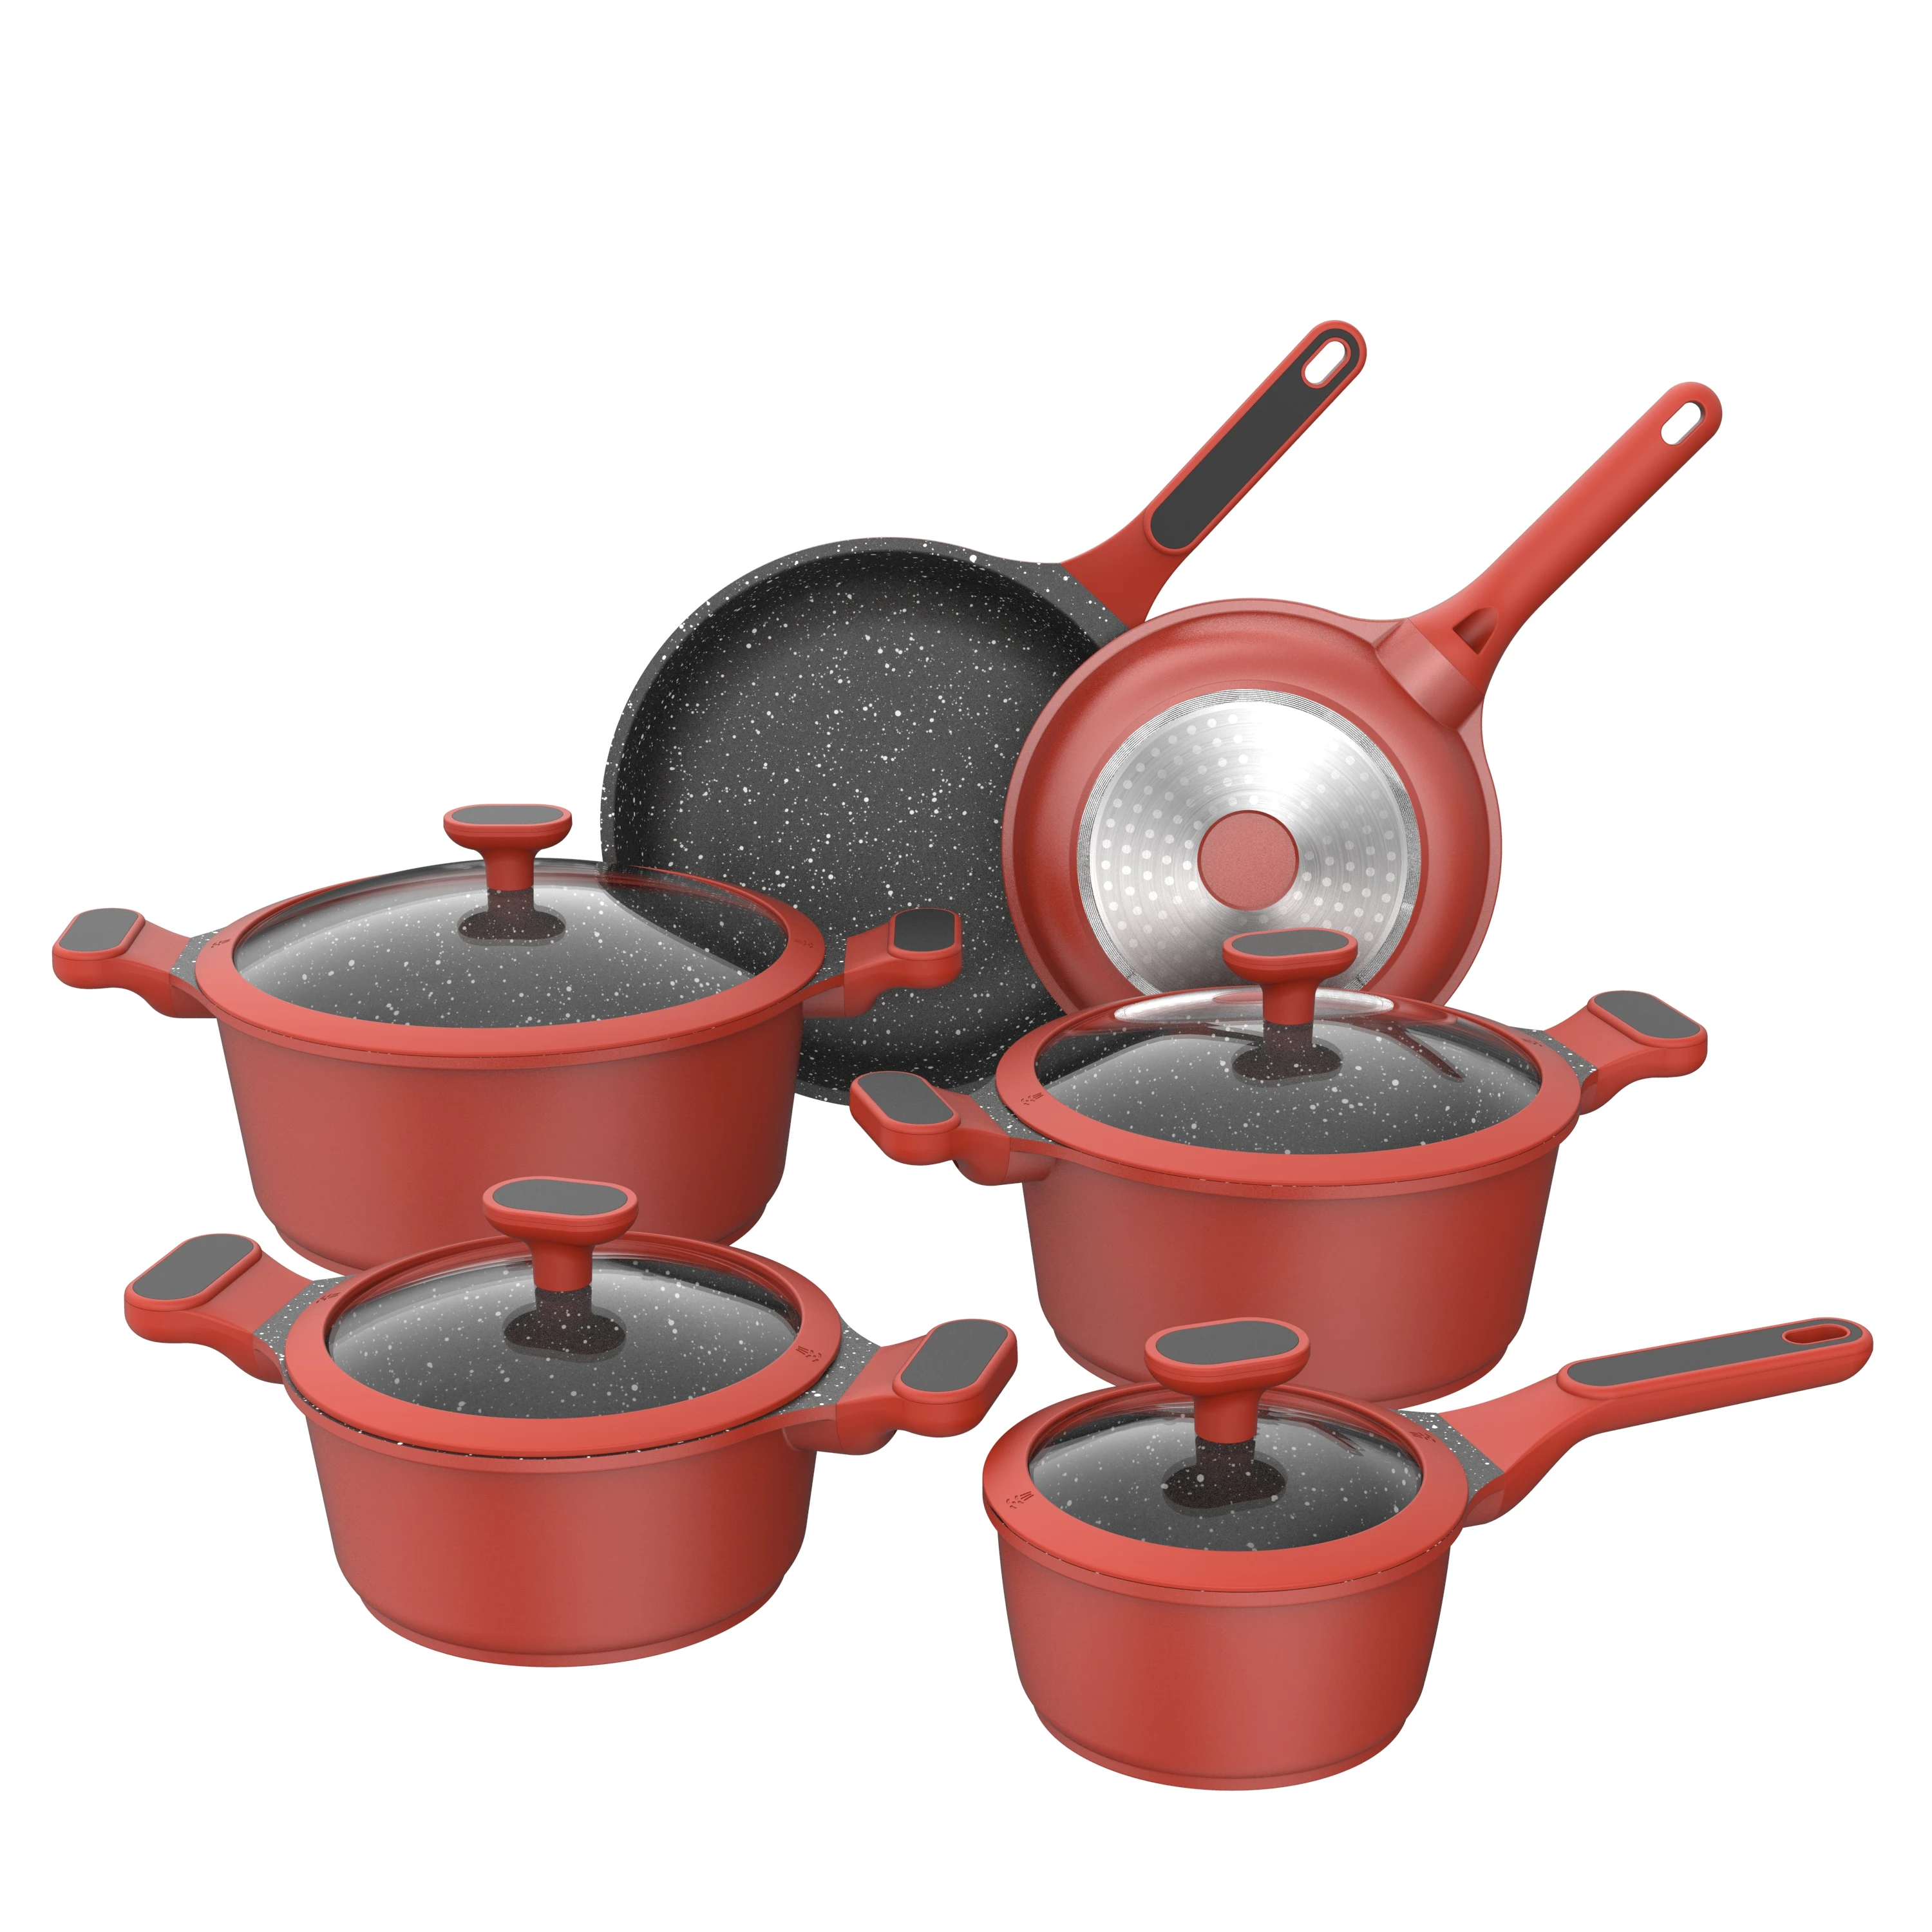 

BESCO Stock Escalation Series 10pcs 2021 New Aluminum Cookware Nonstick Marble Coating Cast Aluminum Cookware Sets with Lid Red